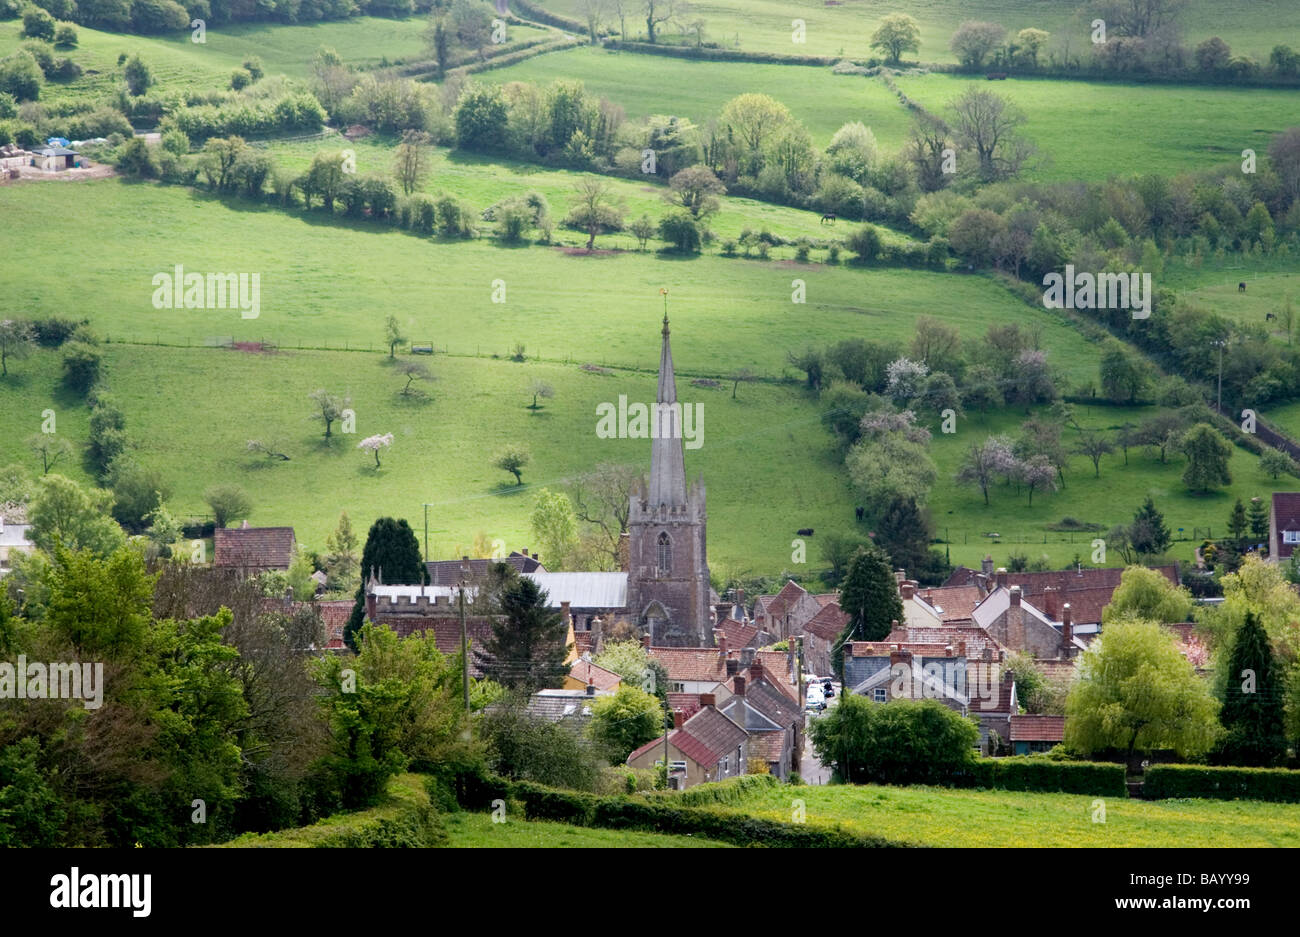 A view of a picturesque English village in a valley: Croscombe, Somerset, UK Stock Photo